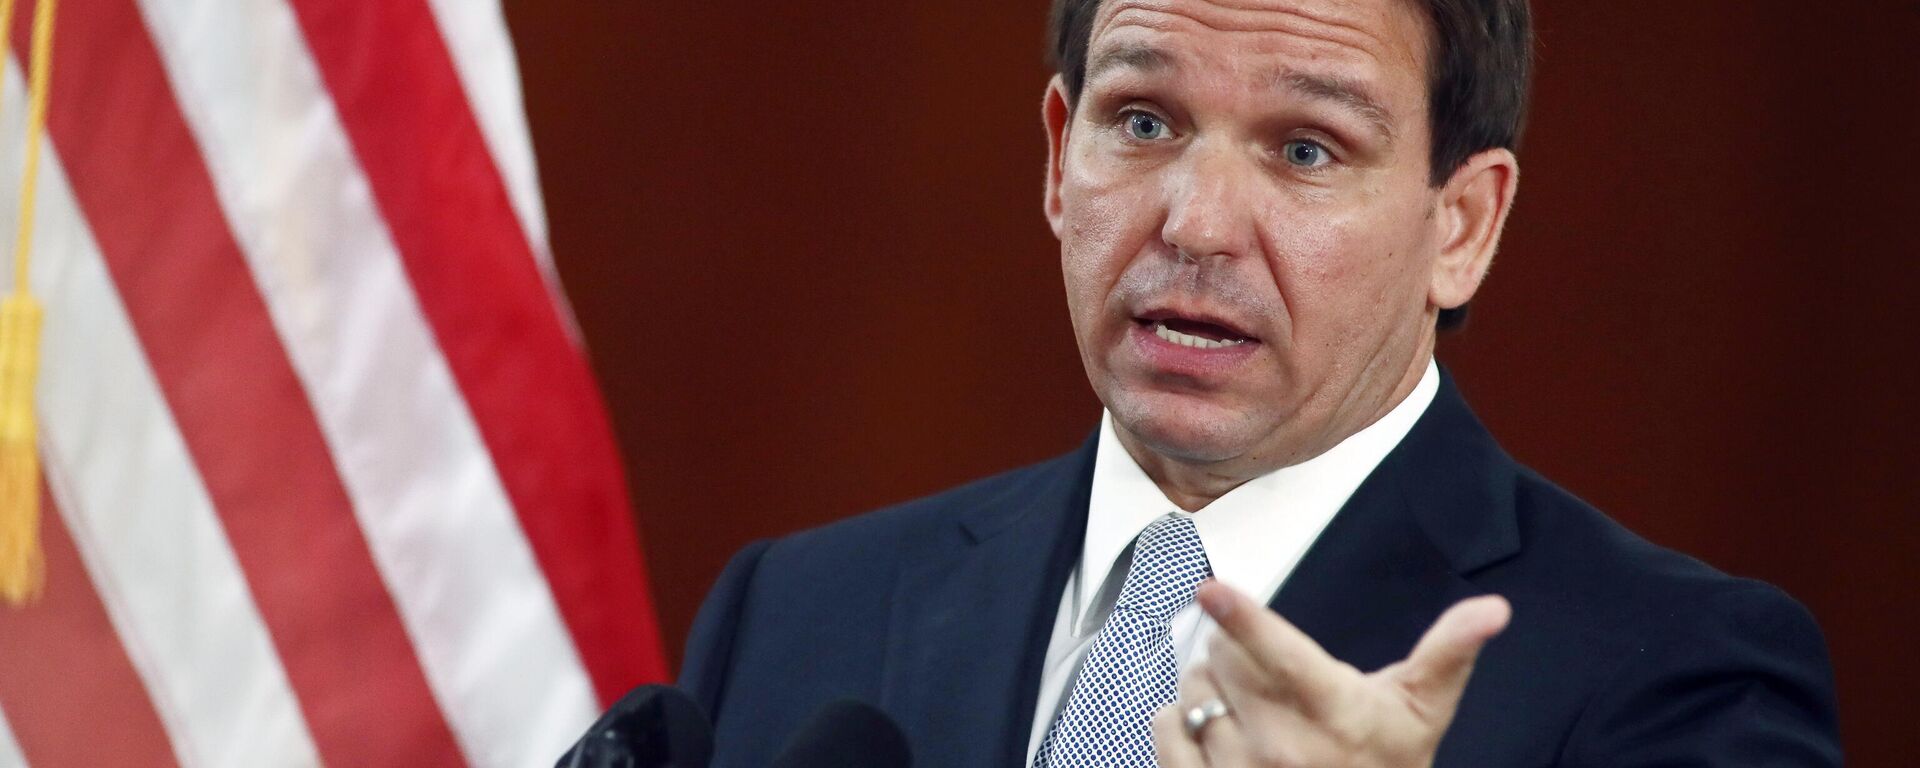 Florida Gov. Ron DeSantis answers questions from the media in the Florida Cabinet following his State of the State address during a joint session of the Senate and House of Representatives Tuesday, March 7, 2023, at the Capitol in Tallahassee, Fla. - Sputnik International, 1920, 10.03.2023